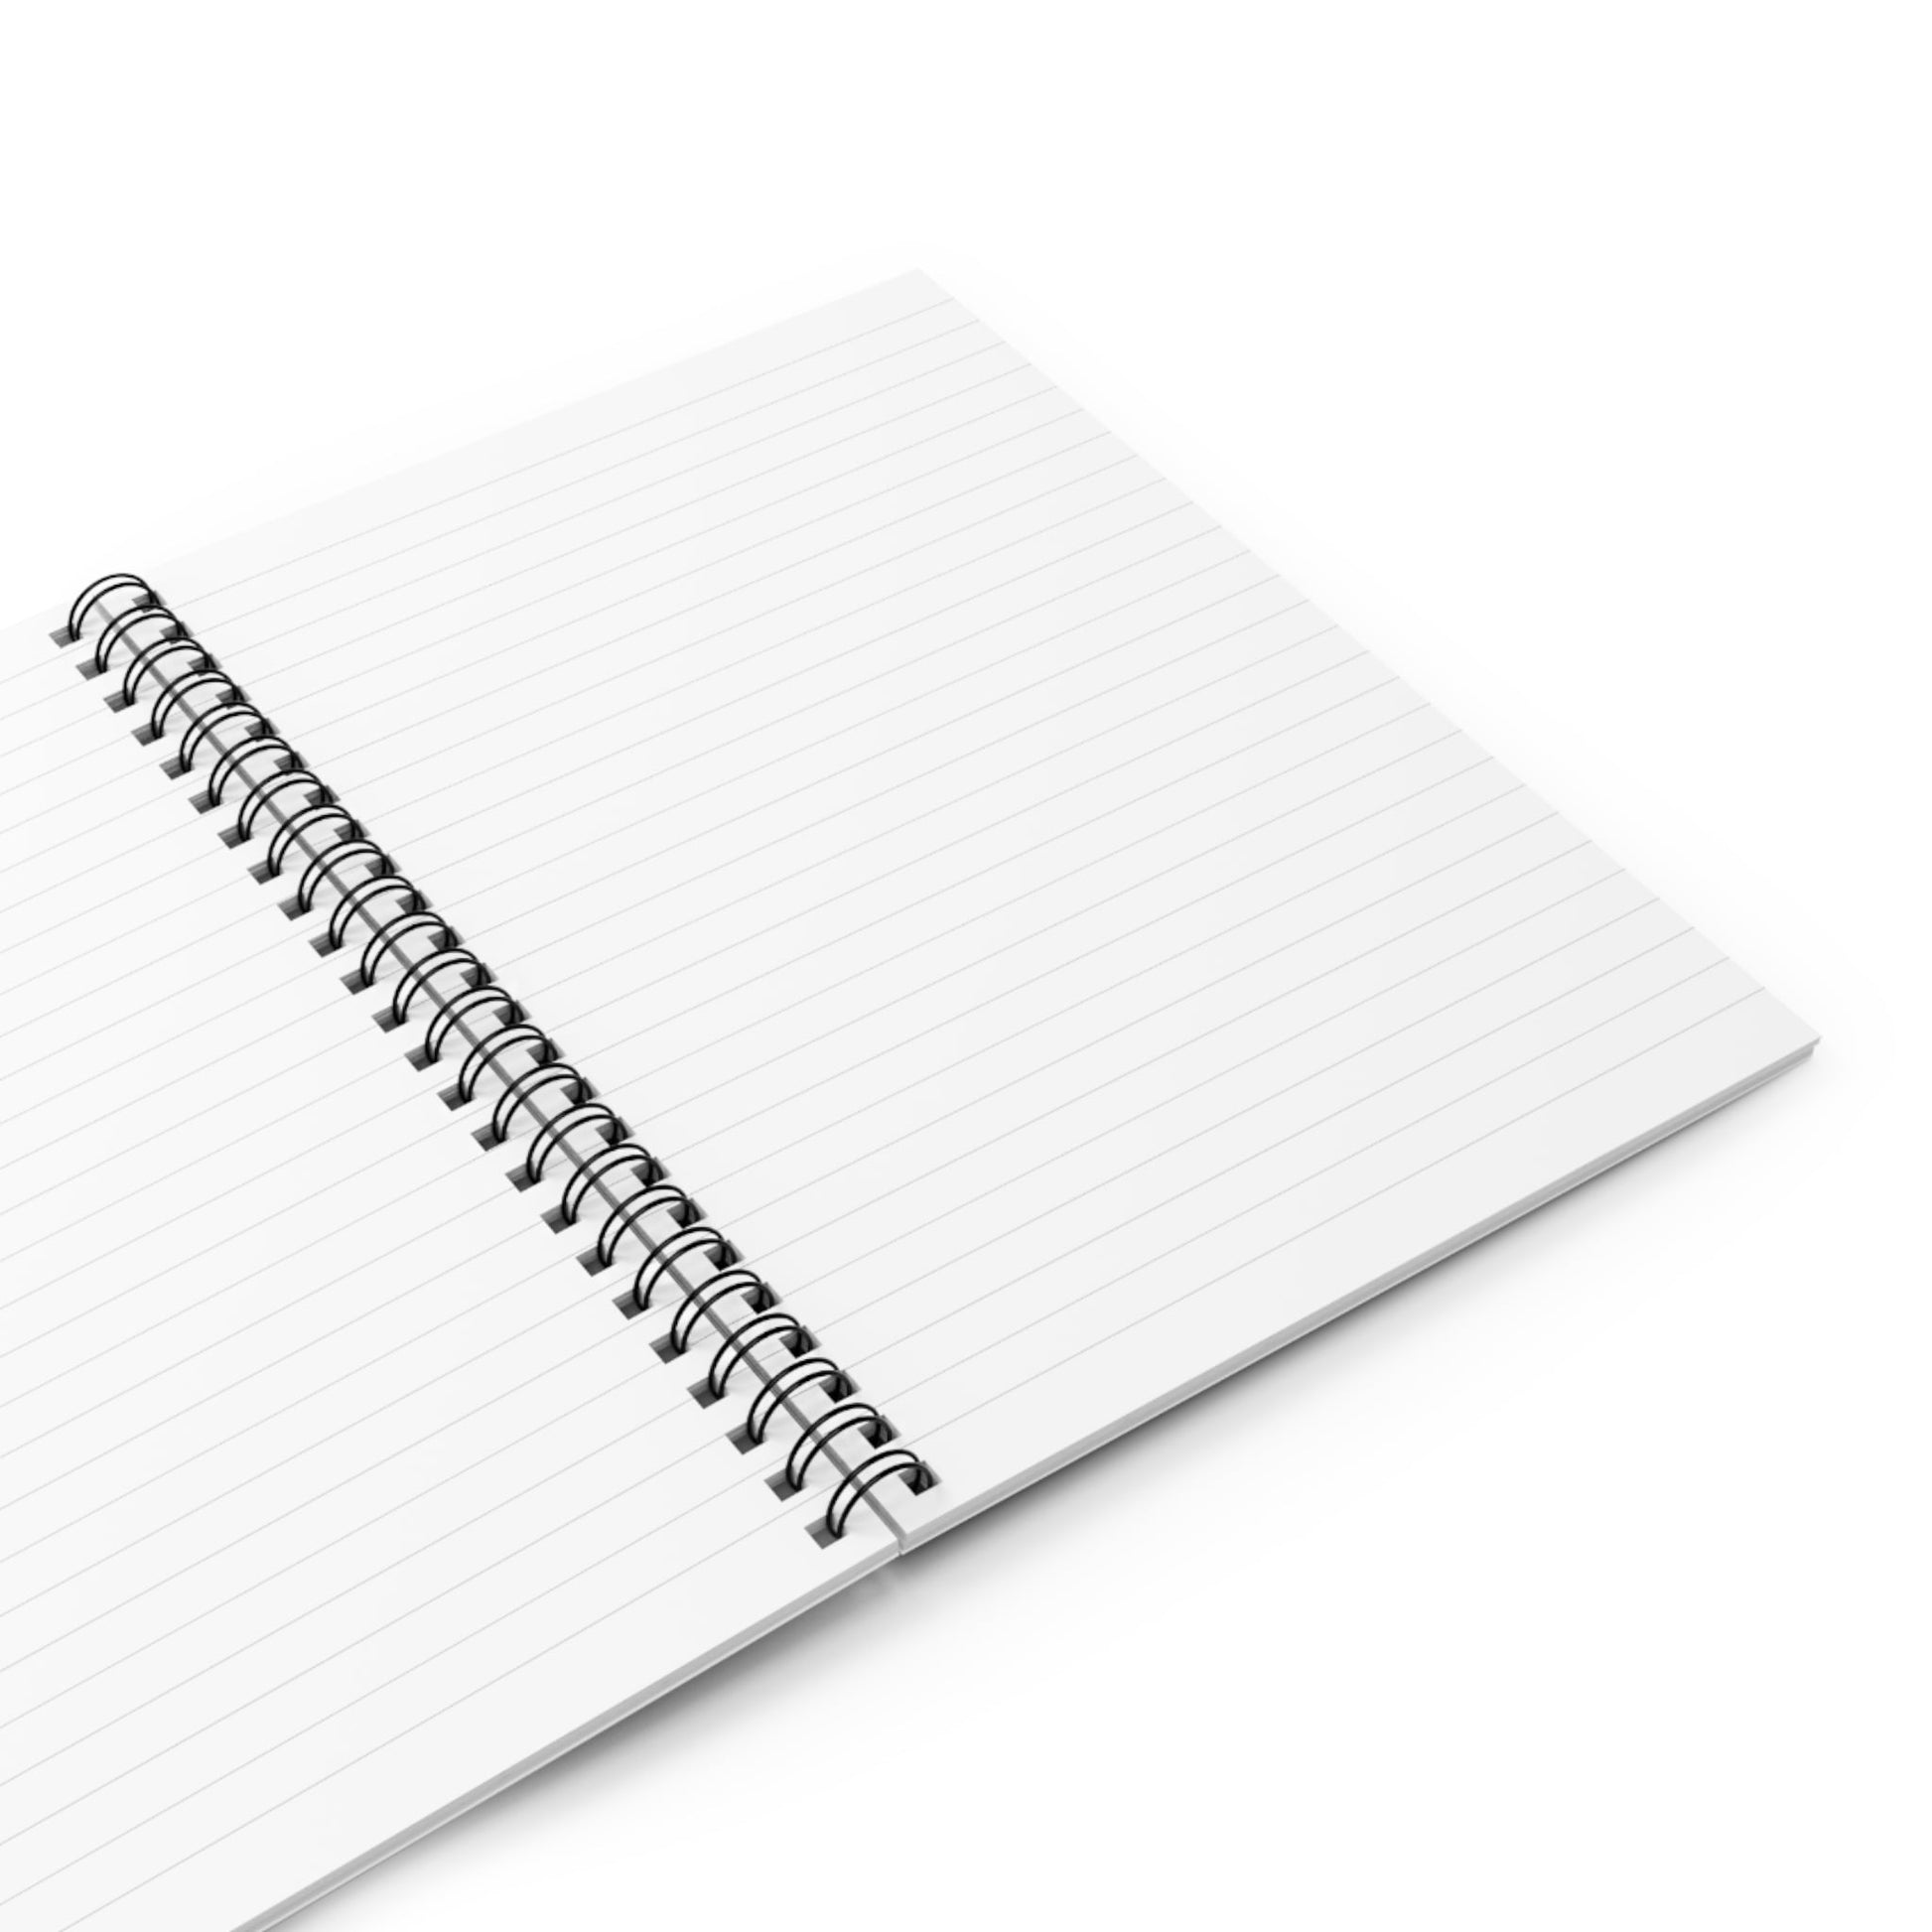 Spiral Notebook with Woman in a White Dress Cover Opened with Blank White College Ruled Pages